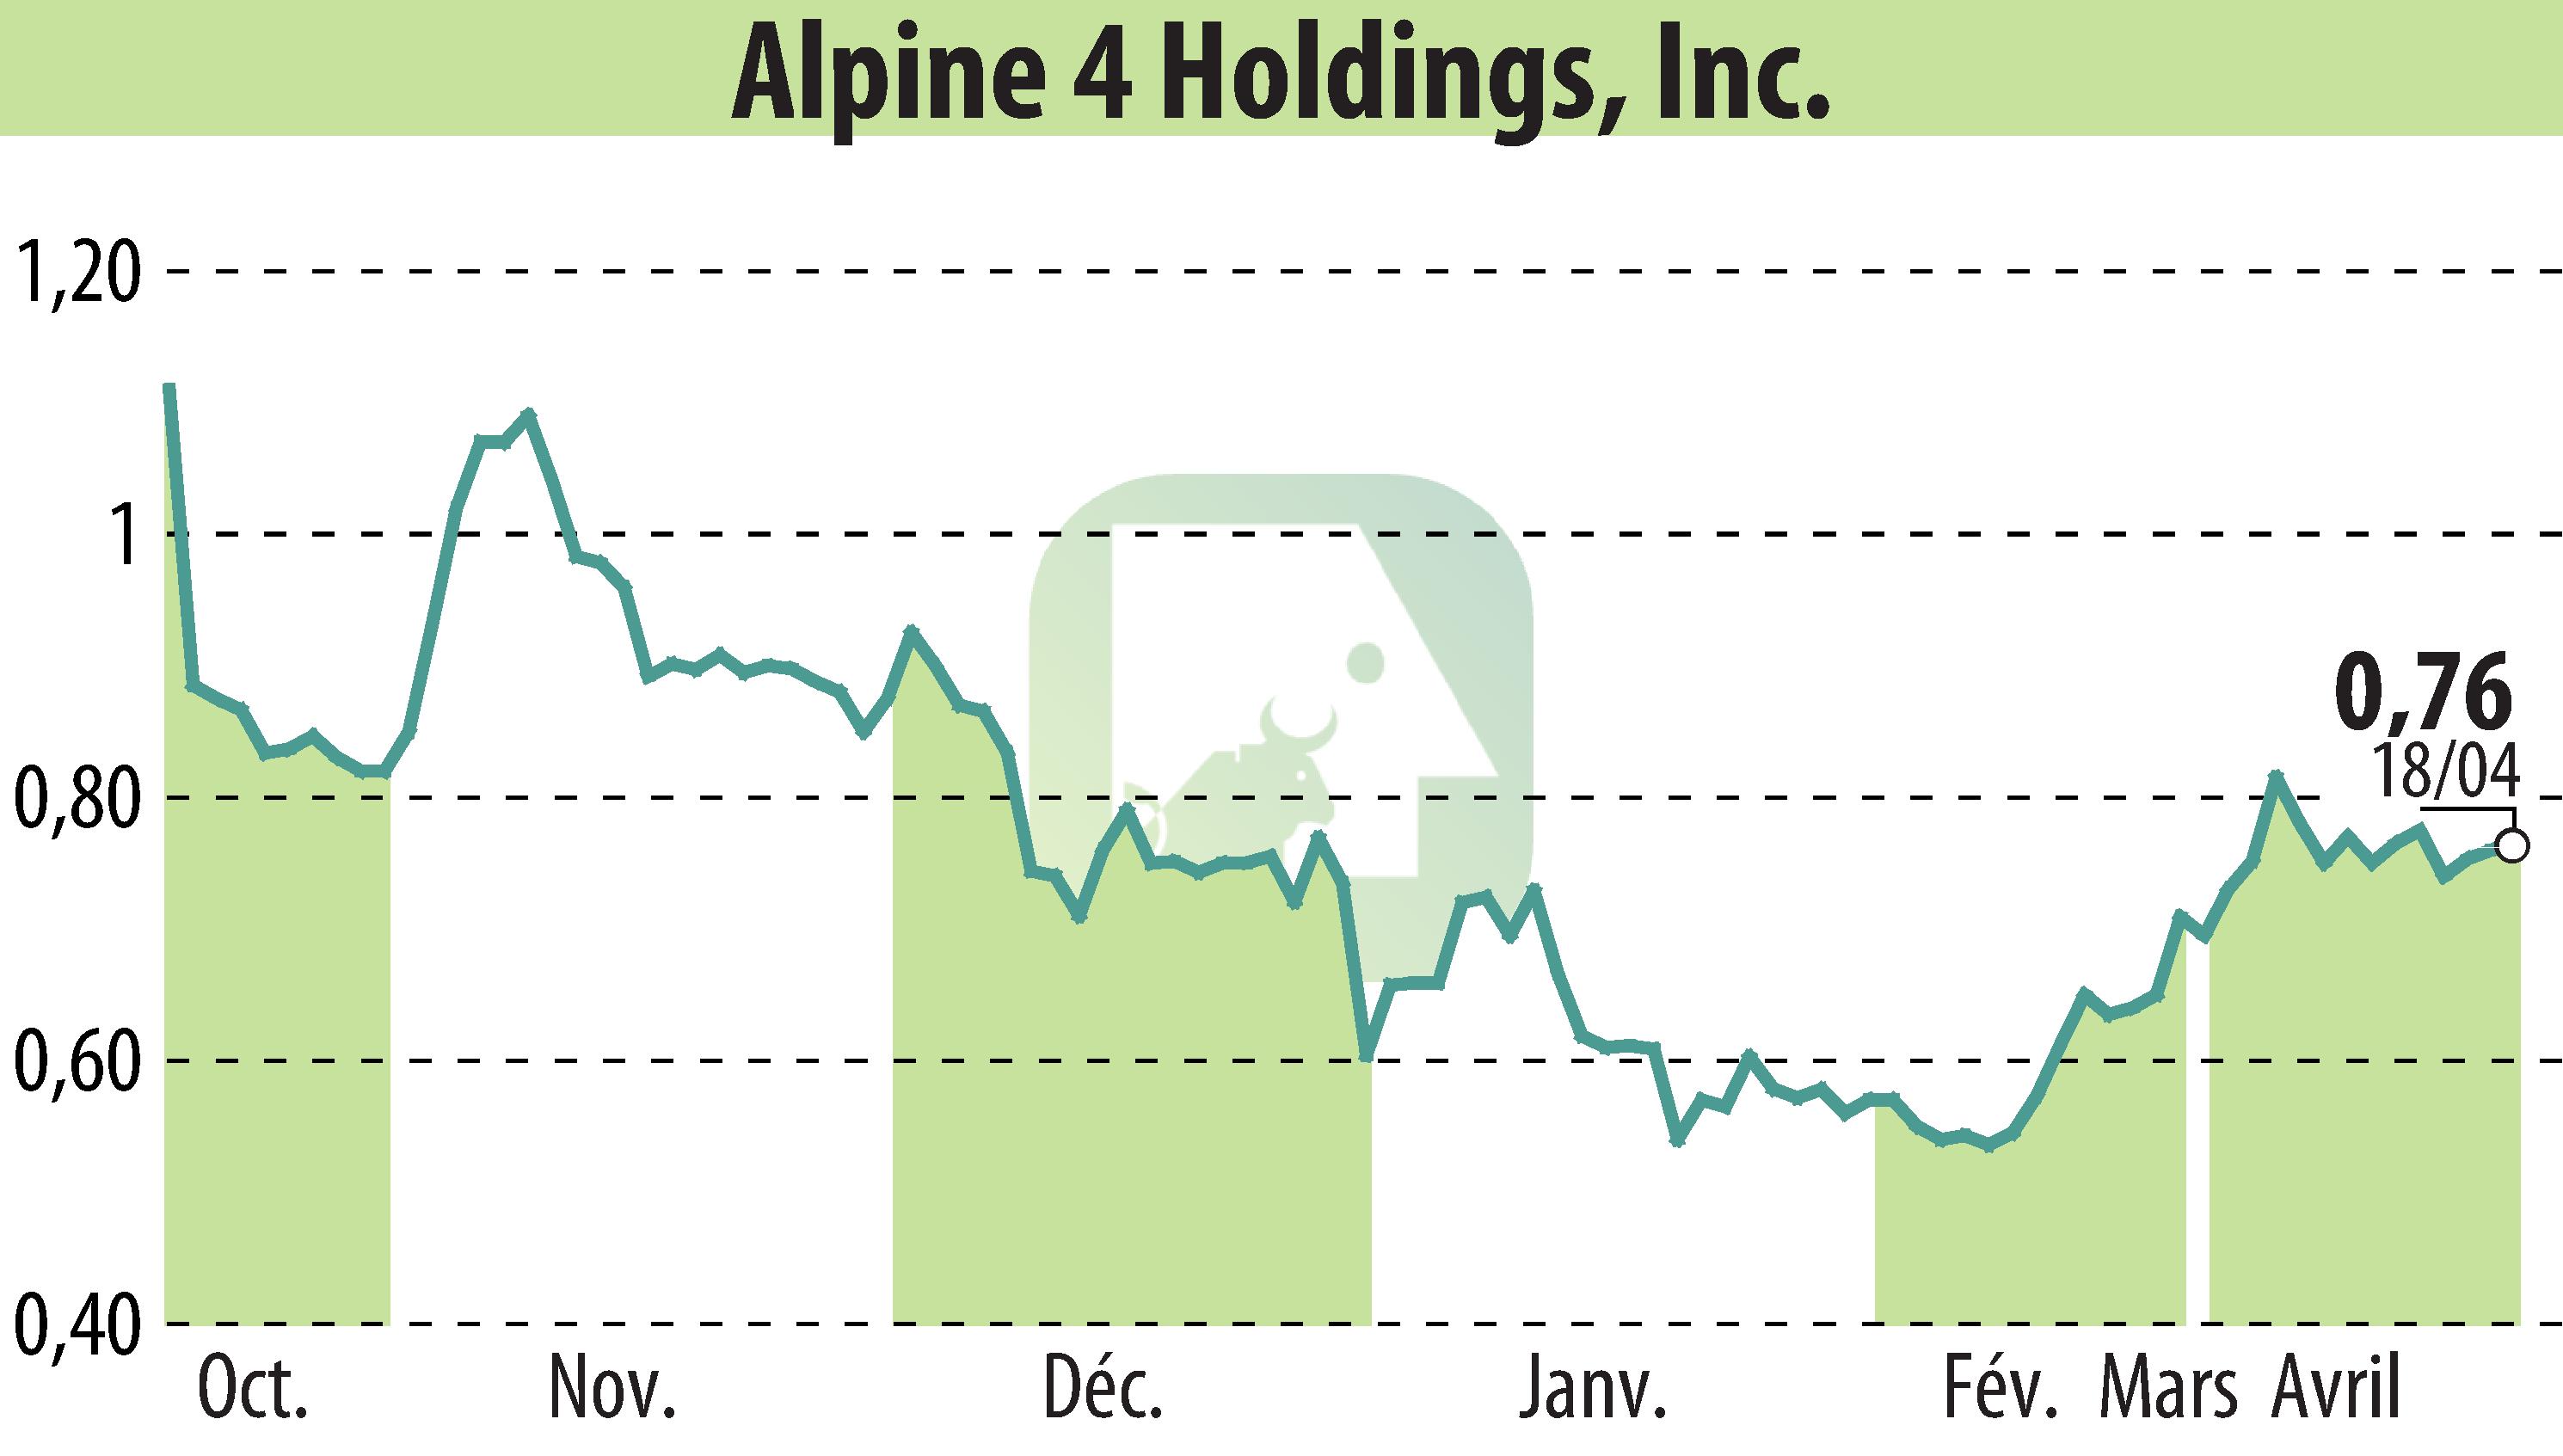 Stock price chart of Alpine 4 Holdings, Inc. (EBR:ALPP) showing fluctuations.